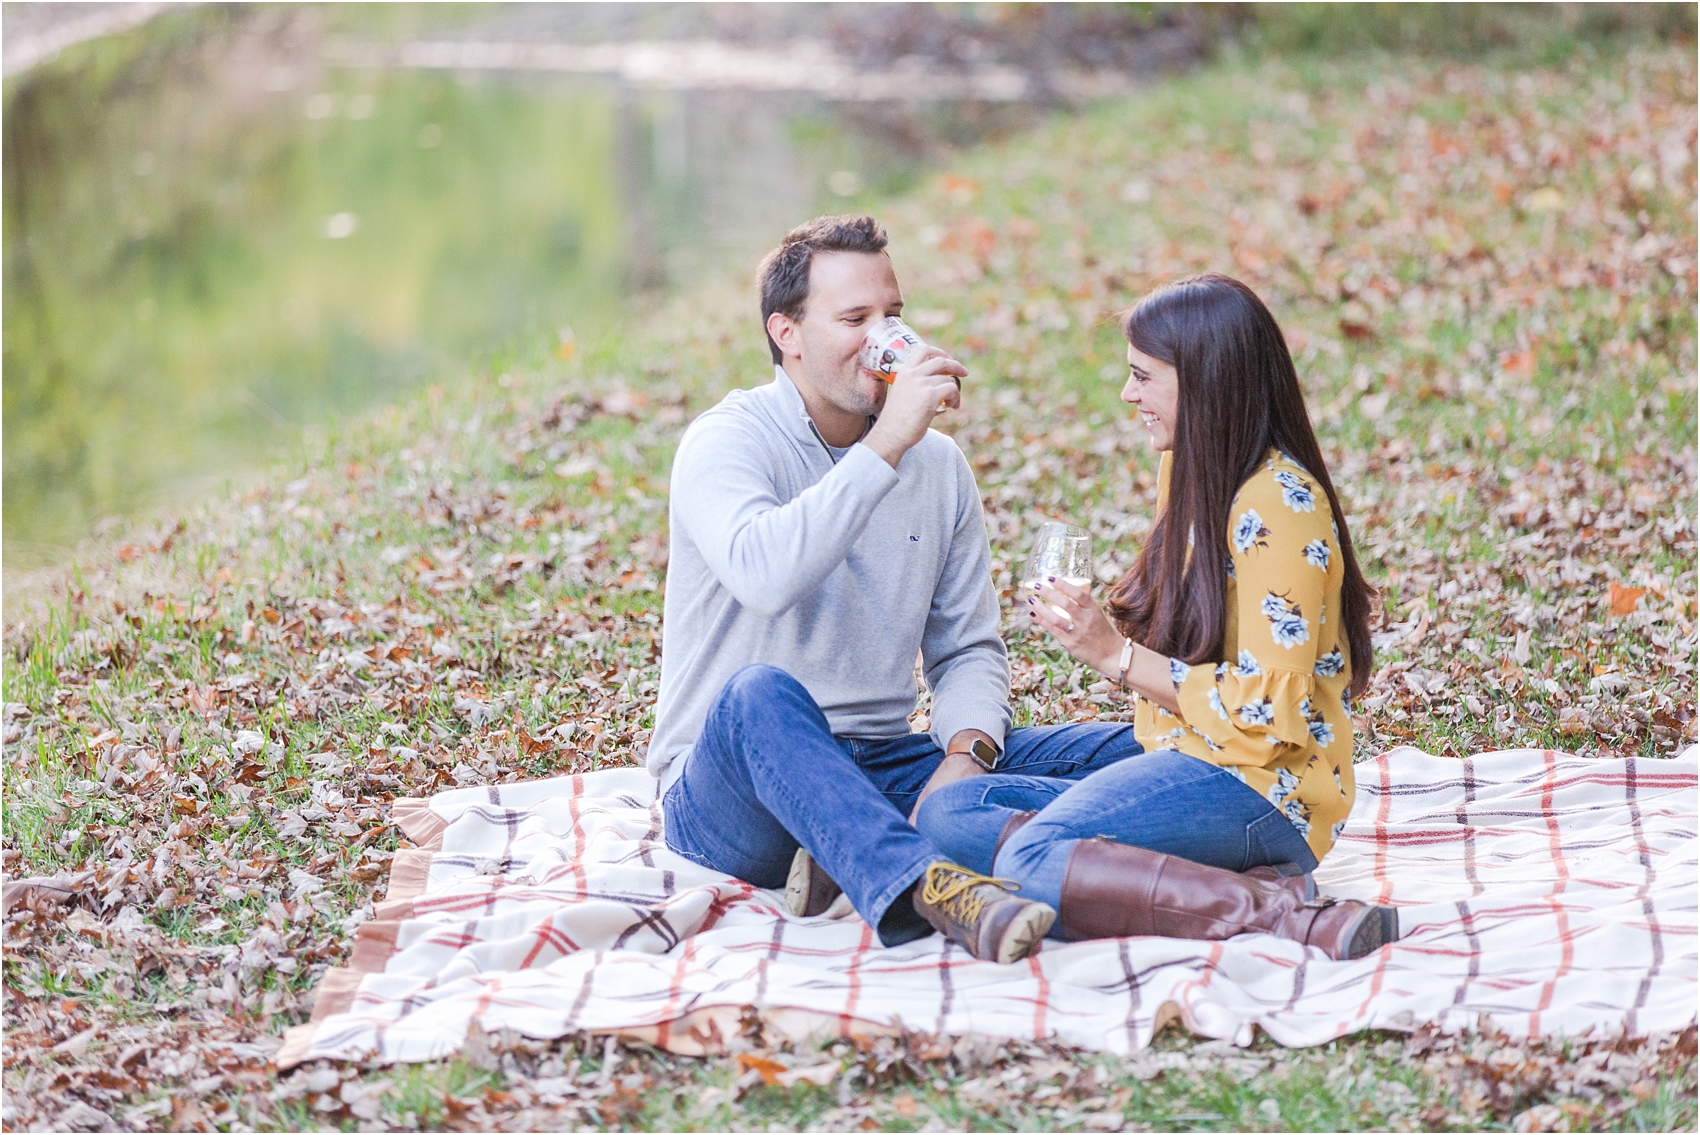 relaxed-autumn-engagement-photos-at-hudson-mills-metropark-in-dexter-mi-by-courtney-carolyn-photography_0016.jpg